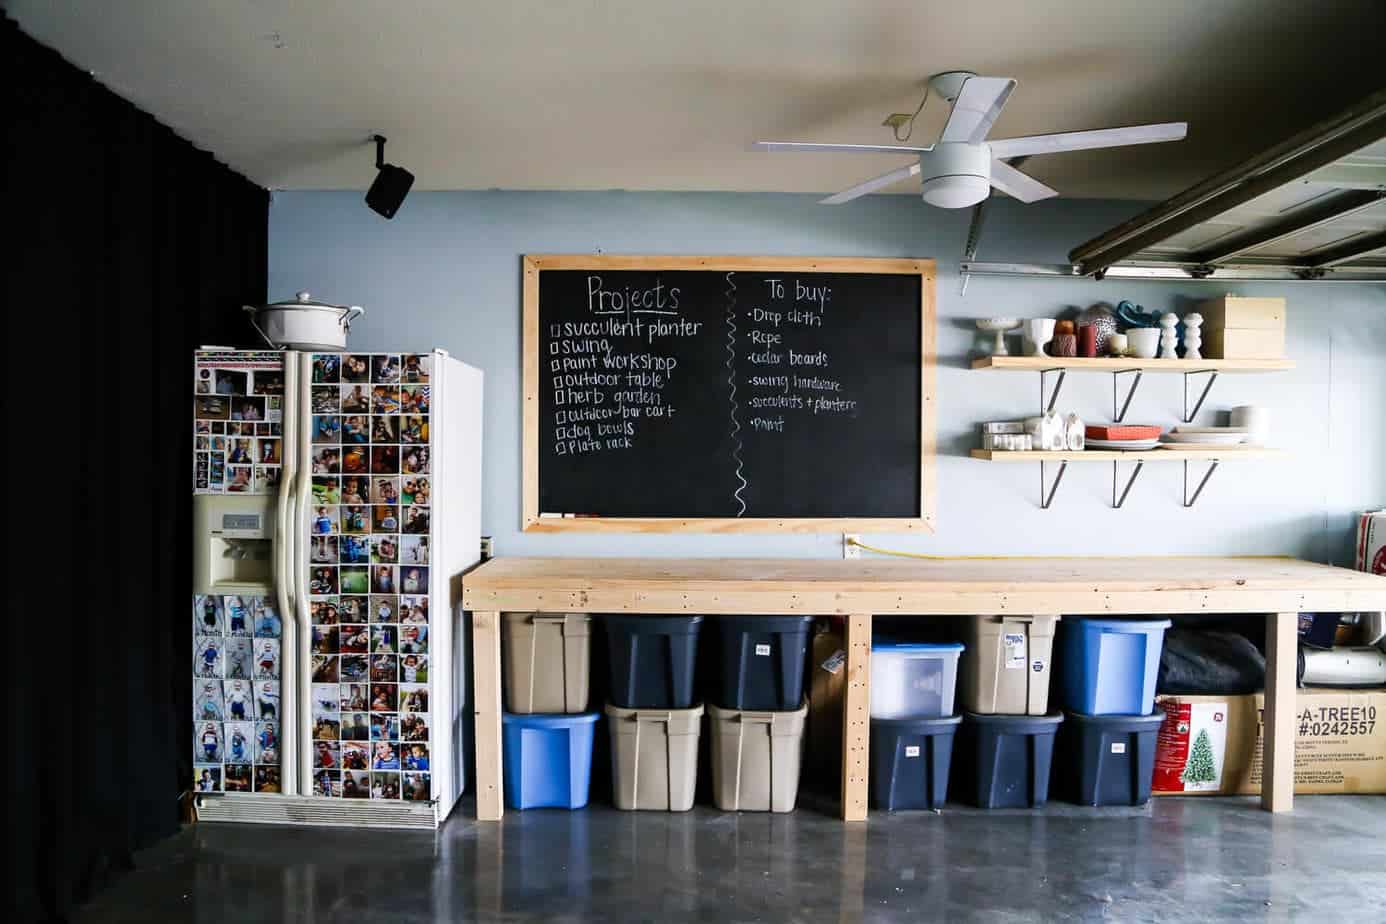 Garage Organization - My Best Tips For a Functional Space